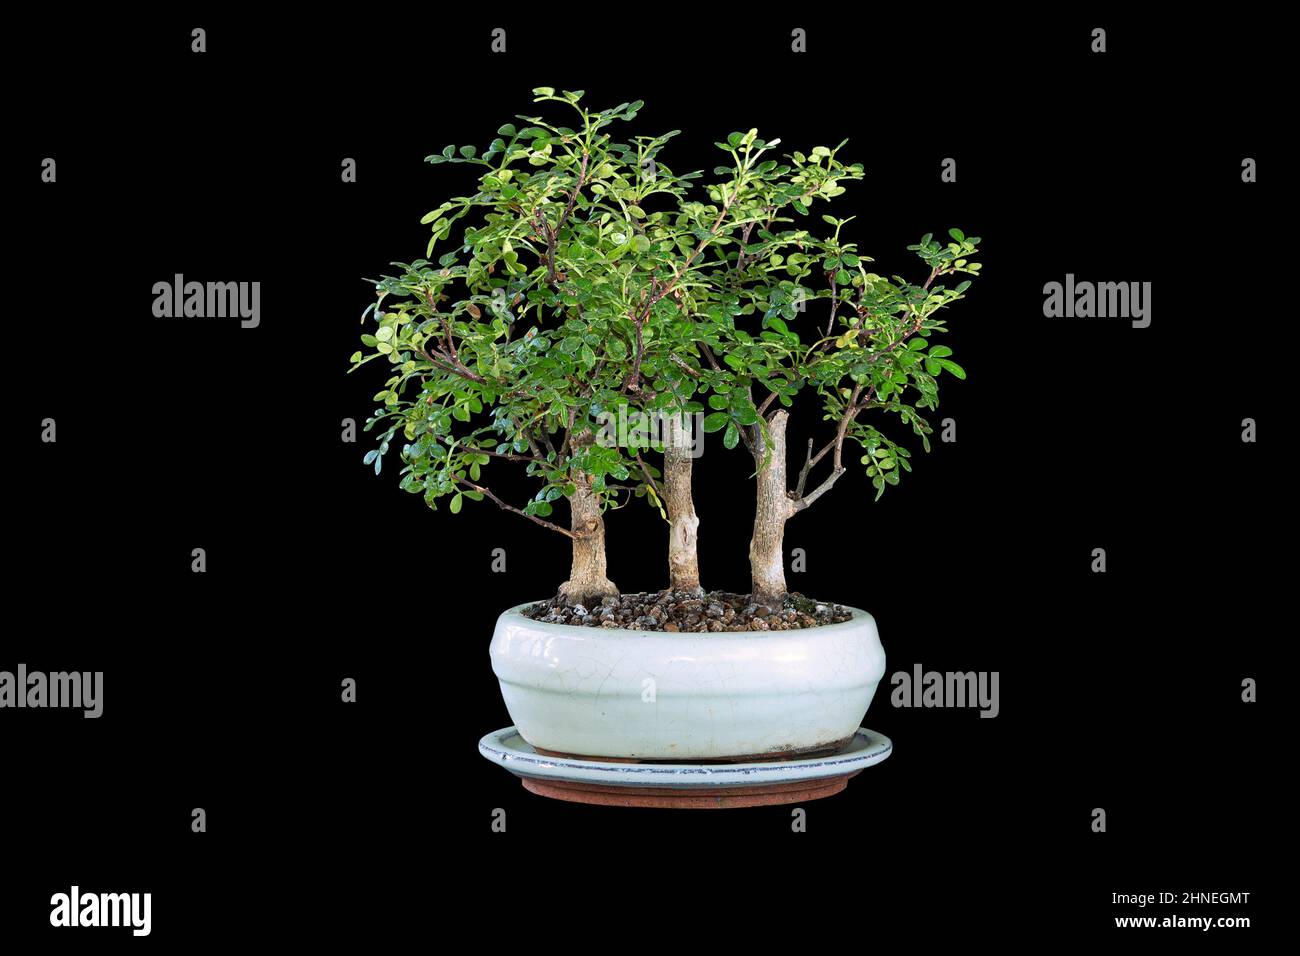 Zanthoxylum piperitum bonsai forest, the tiny chinese  pepper tree planted in a ceramic pot, isolation over dark background Stock Photo